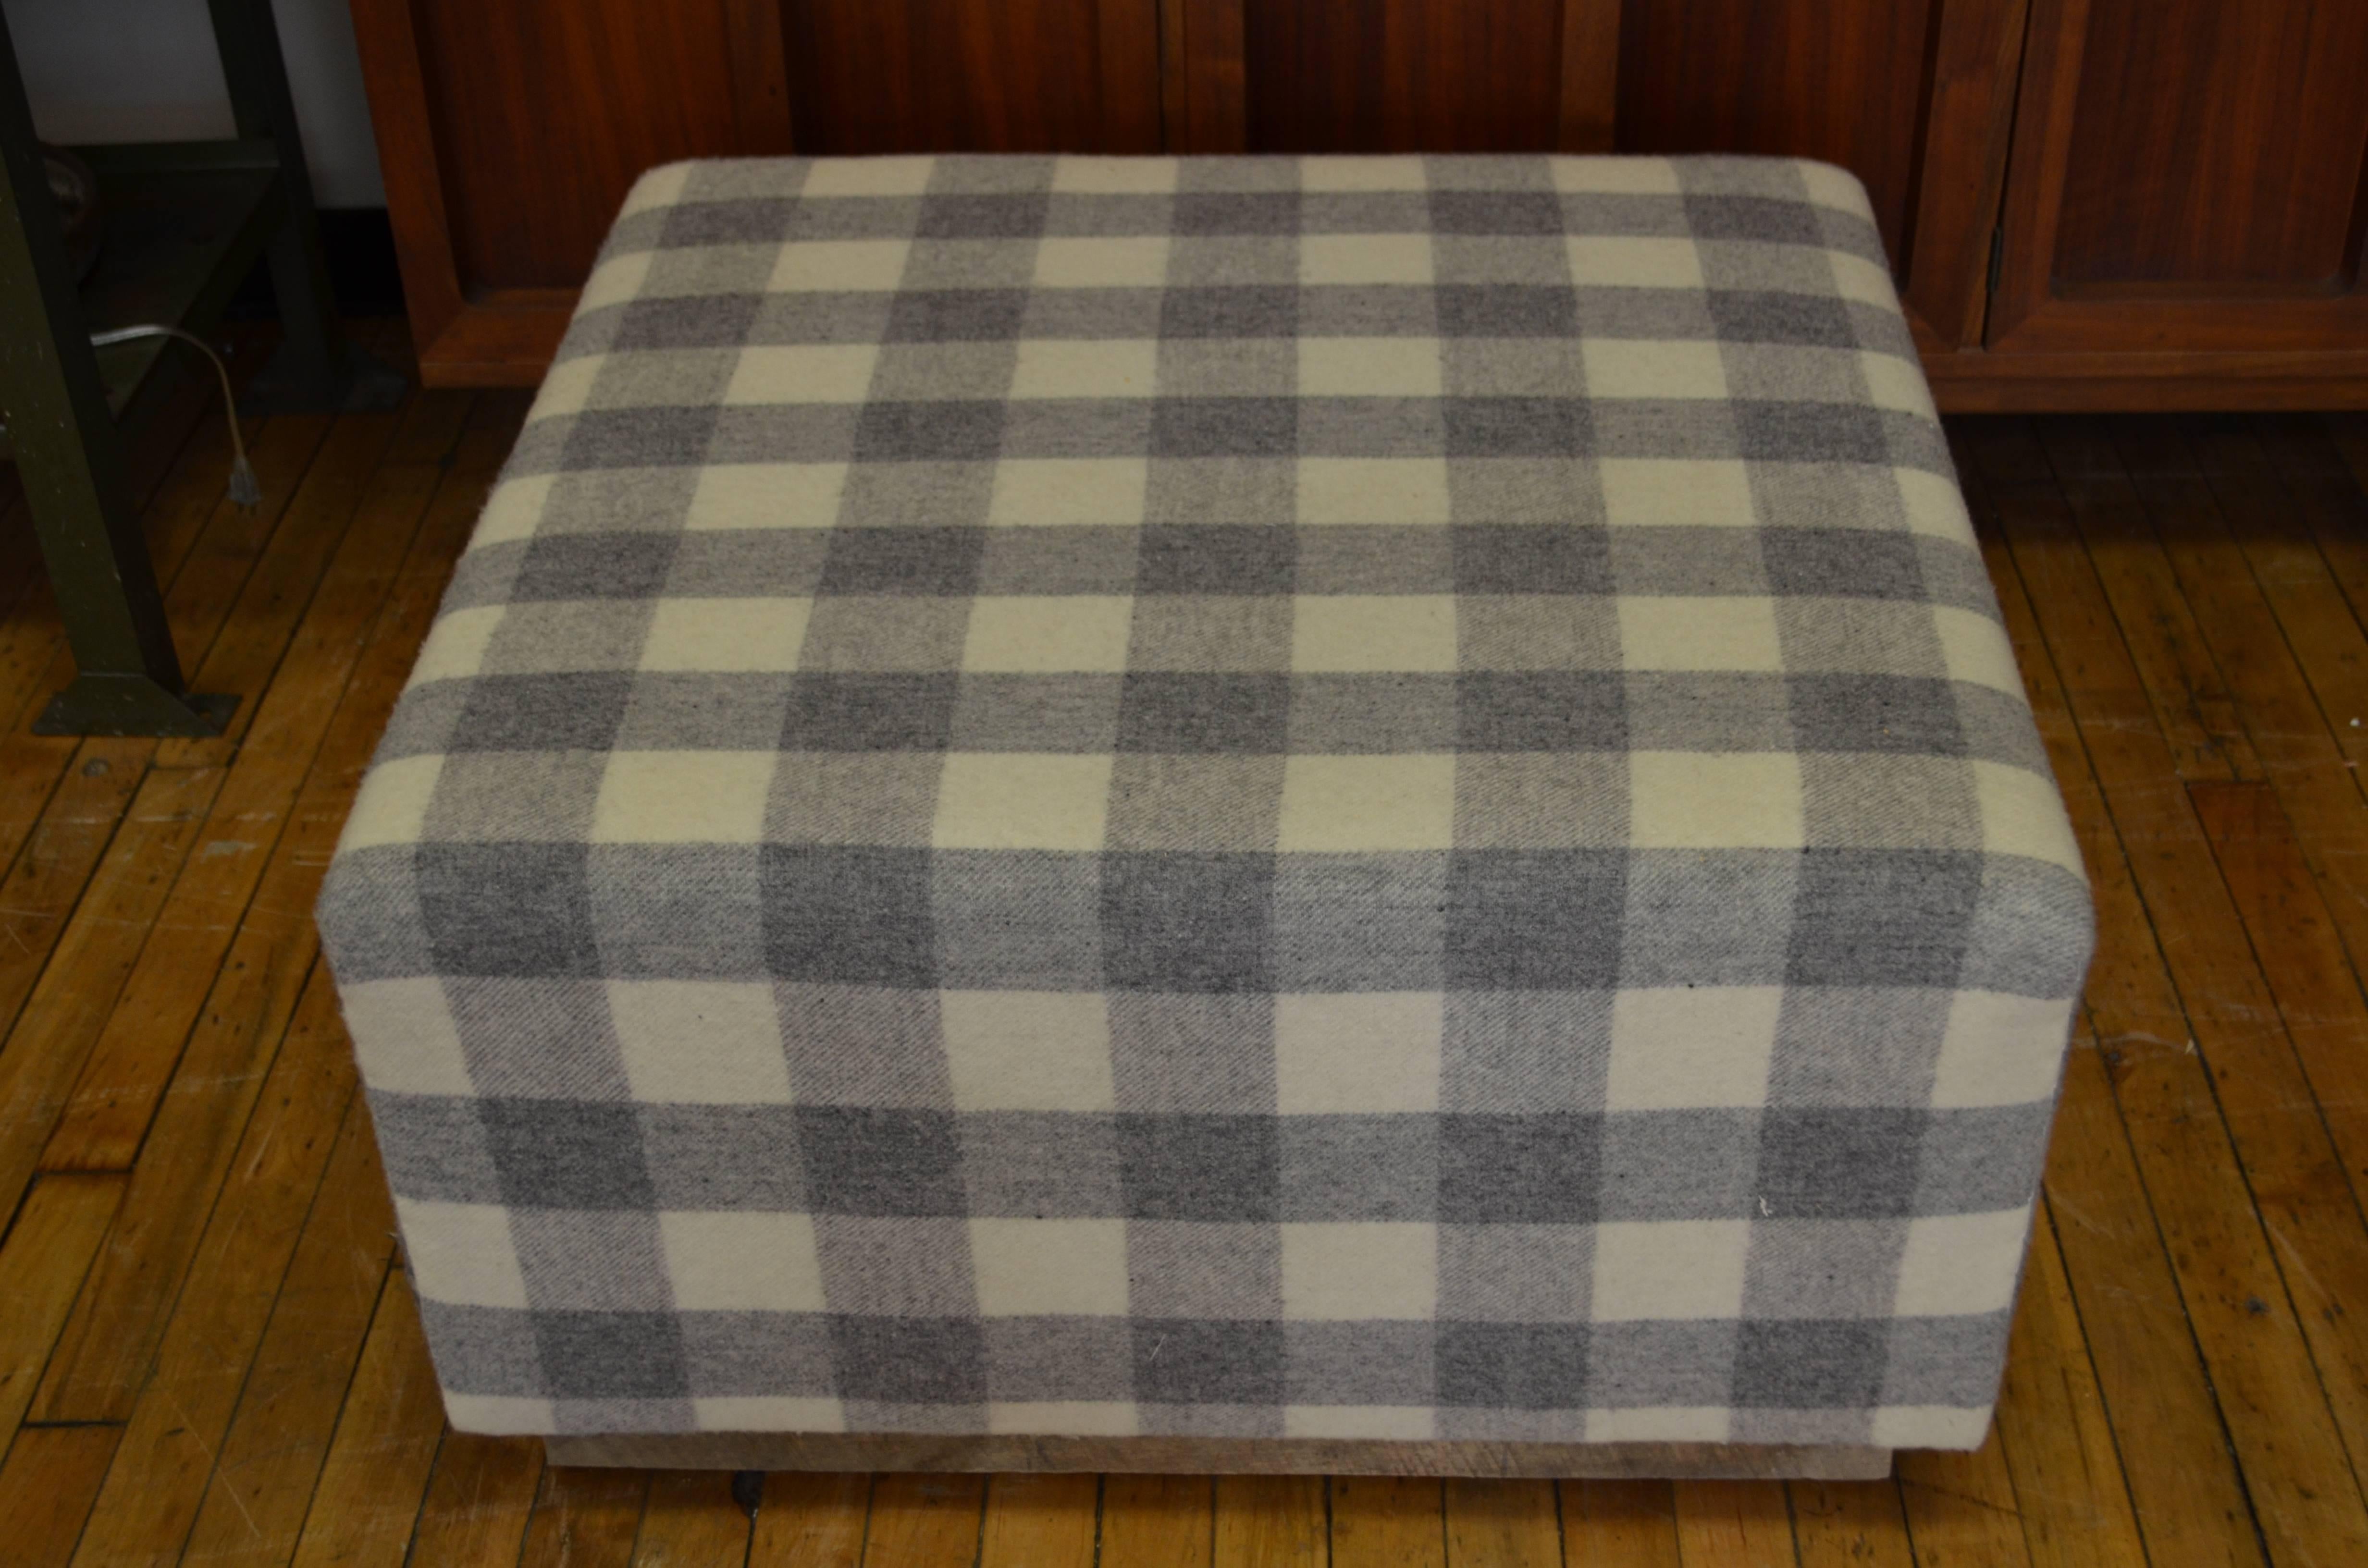 Ottoman upholstered in vintage woolen blanket mounted on barn board wood base. Newly upholstered by a Parisian-trained upholsterer. Note the blanket stitch on corners in the sidebar photo. Soft on the eyes and to the touch. Warm. Sophisticated.